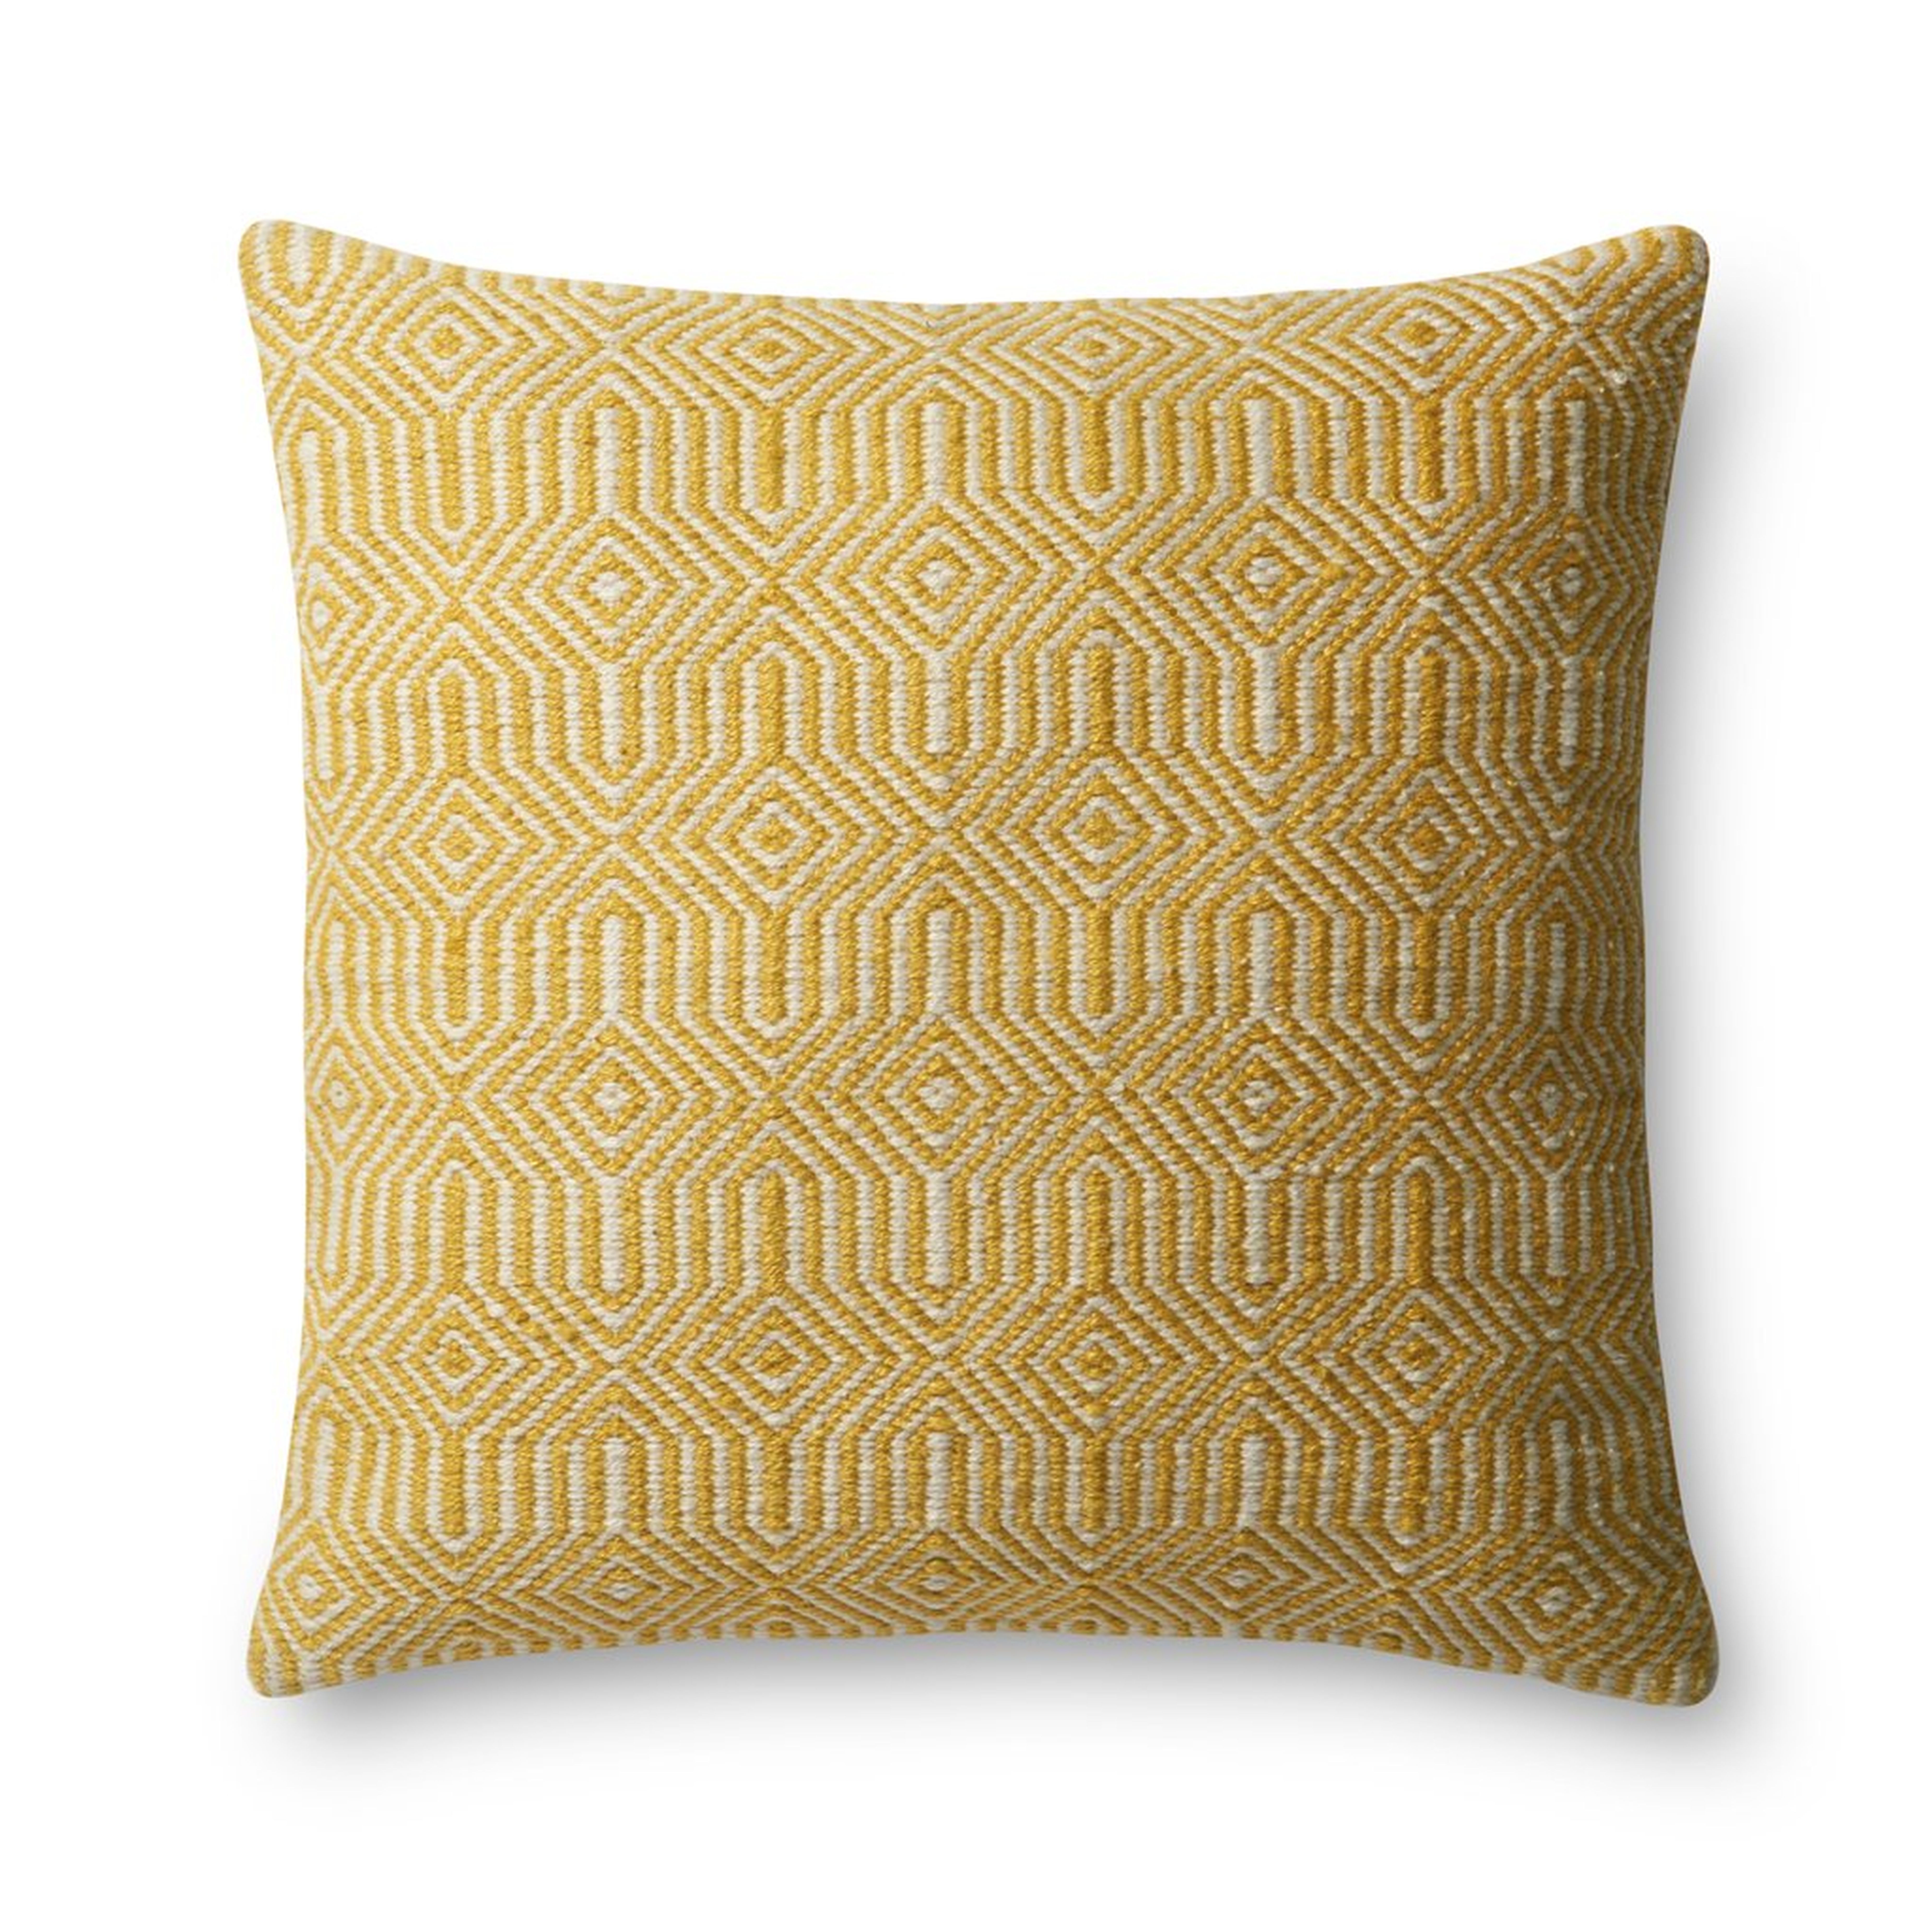 Woven Pattern Throw Pillow, 22''x22'', Yellow & Ivory - Loloi Rugs